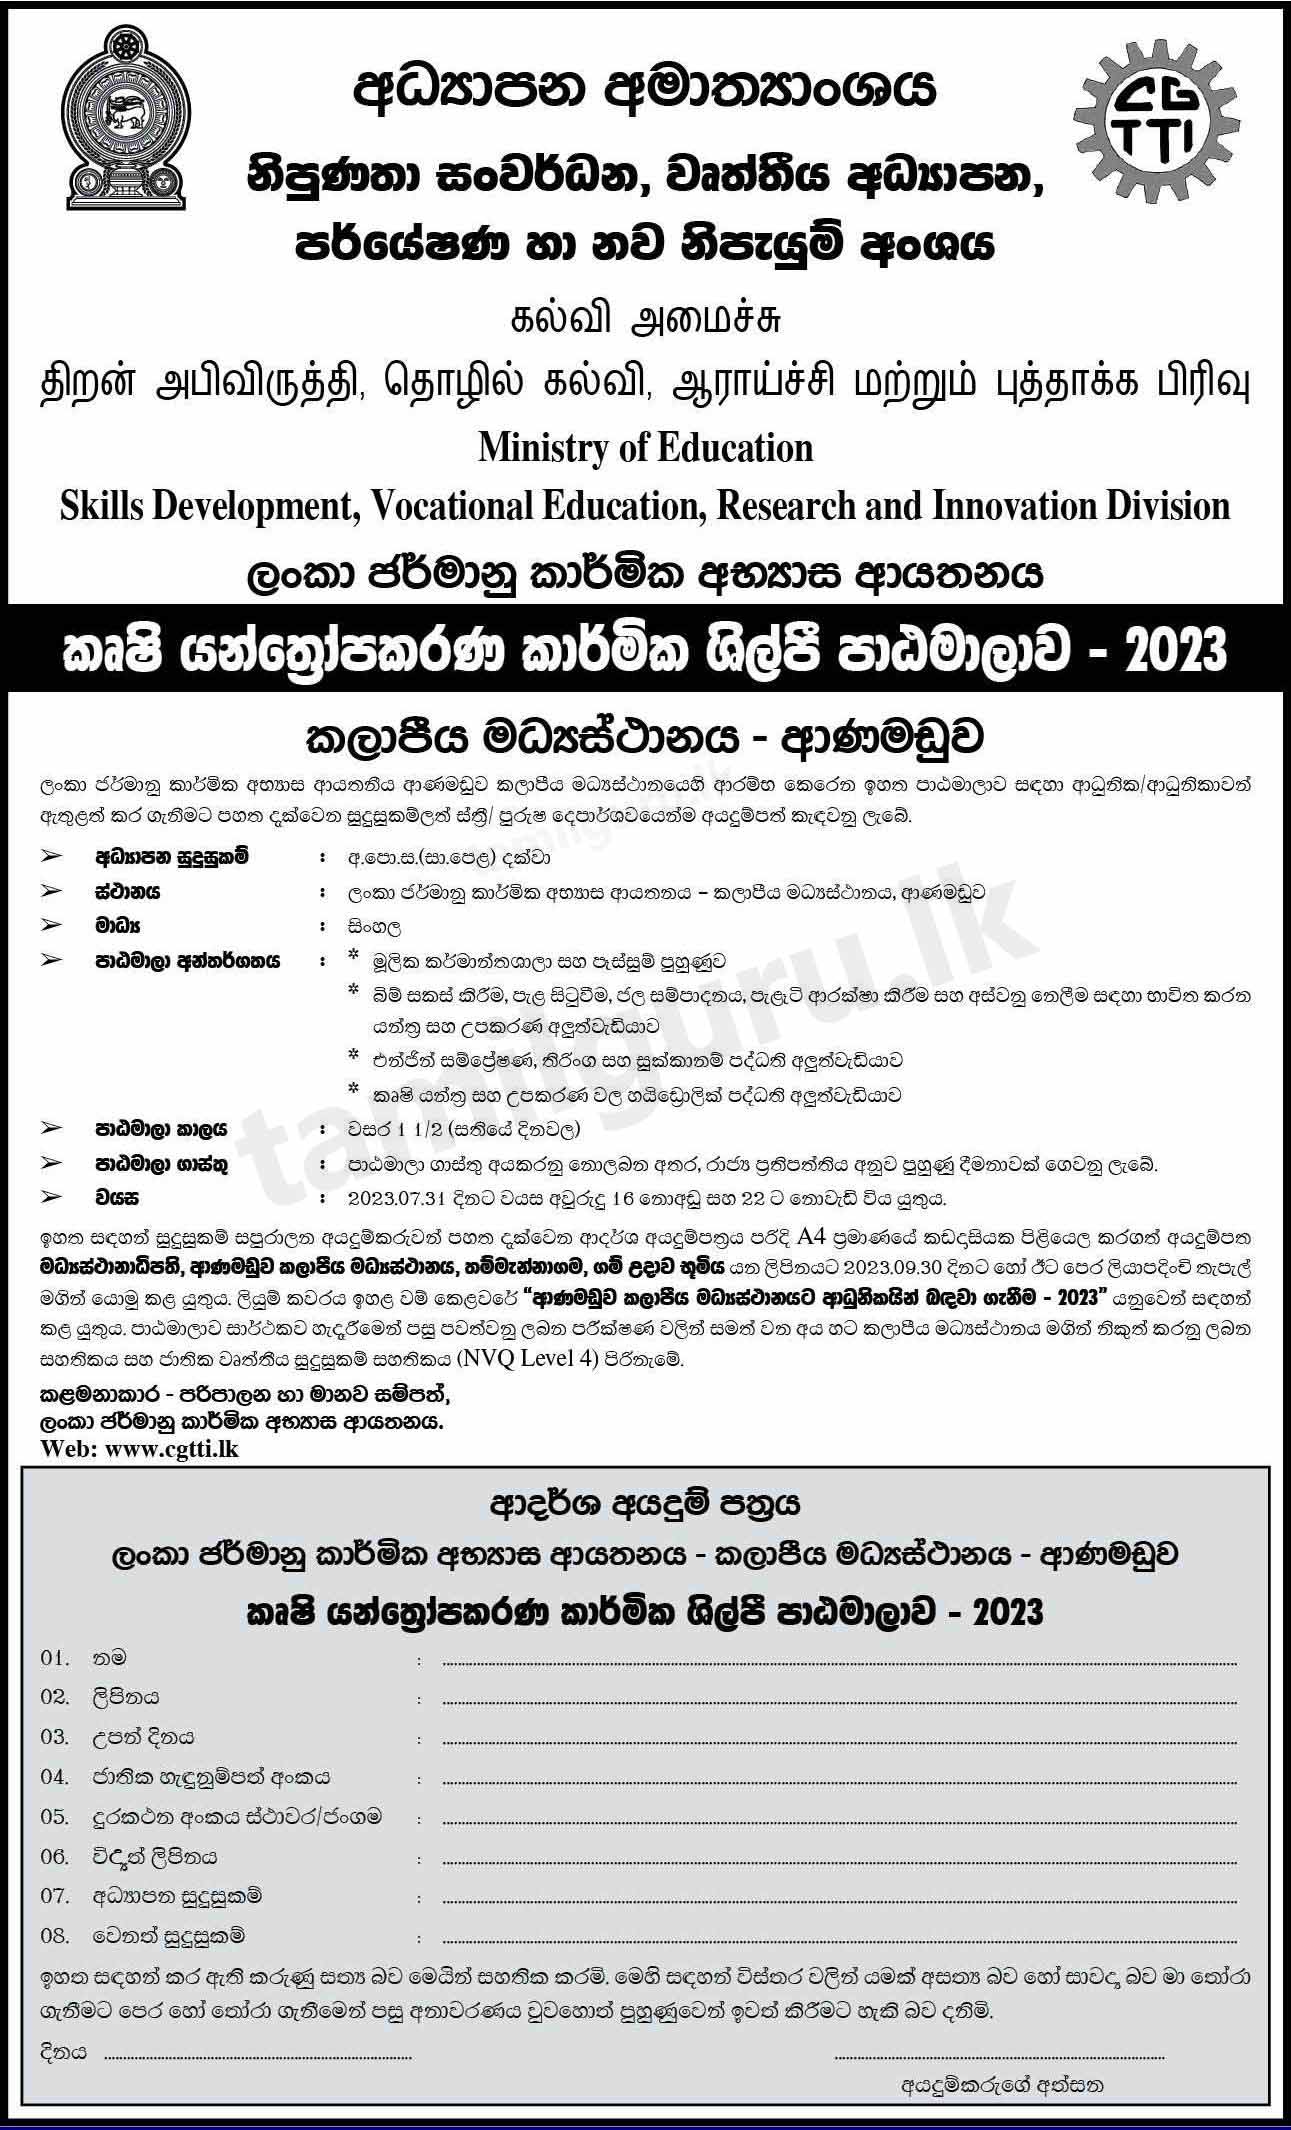 Agriculture Machinery Technician Course (Intake 2023) at German Tech (CGTTI)